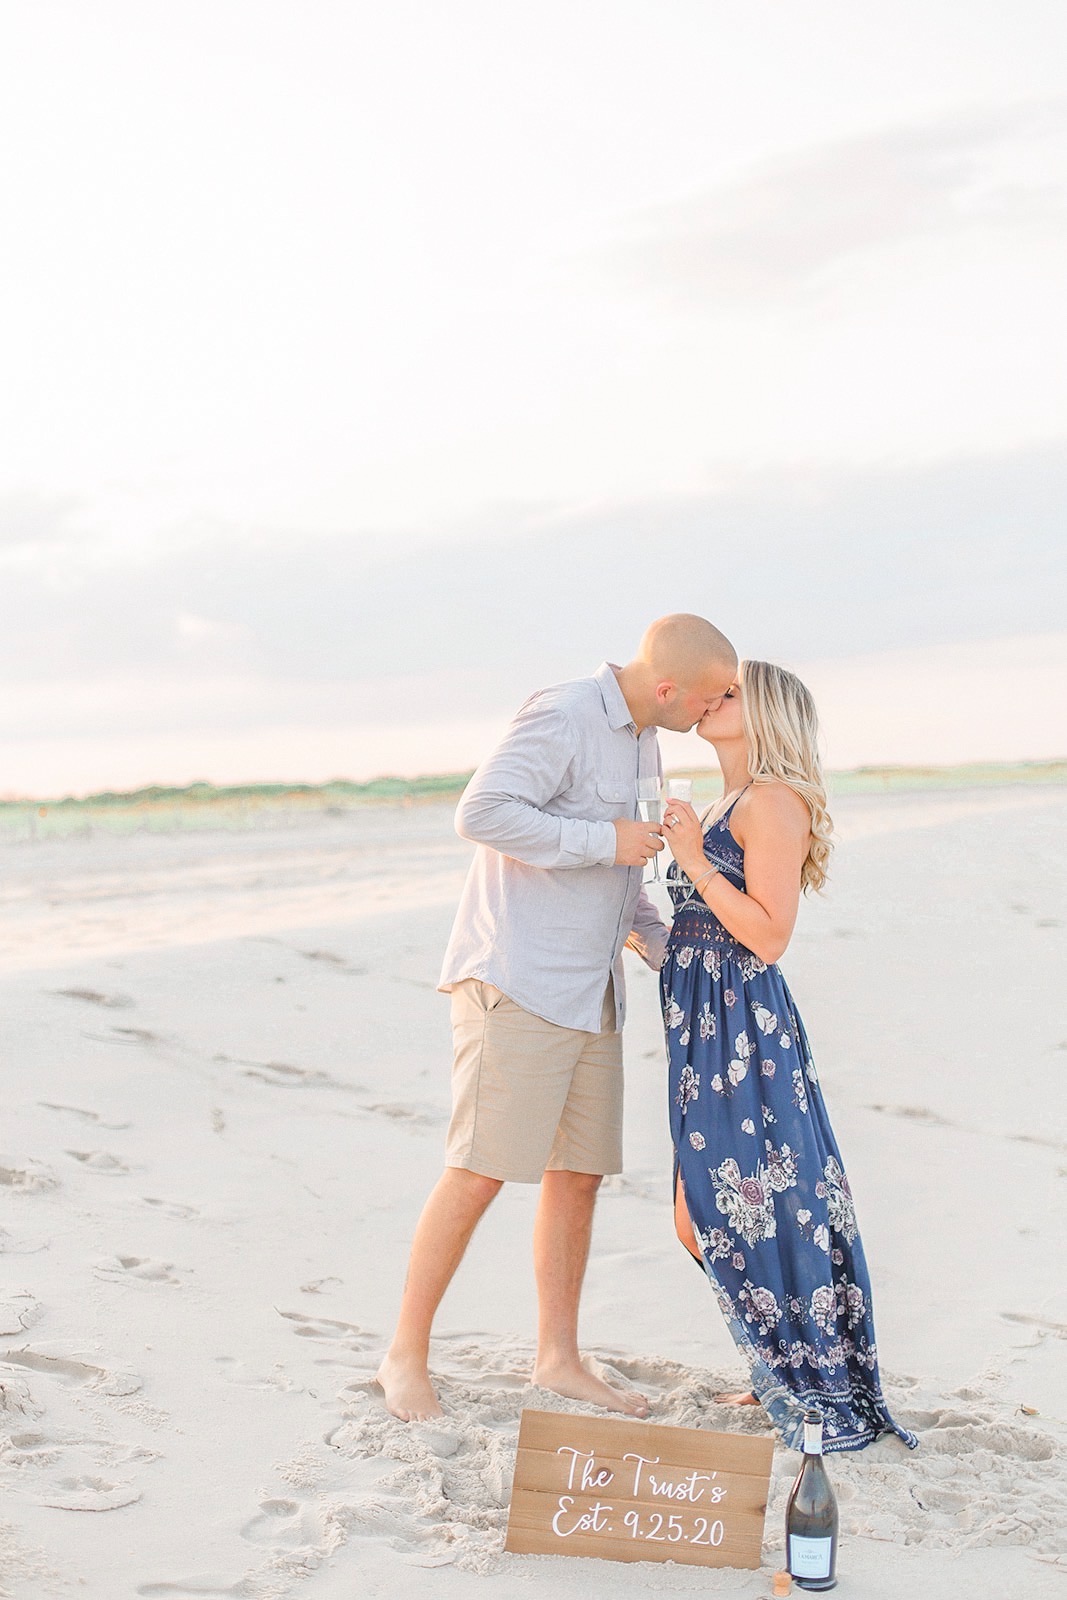 Getting in the Water | A Guide to Beach Engagement Sessions ...